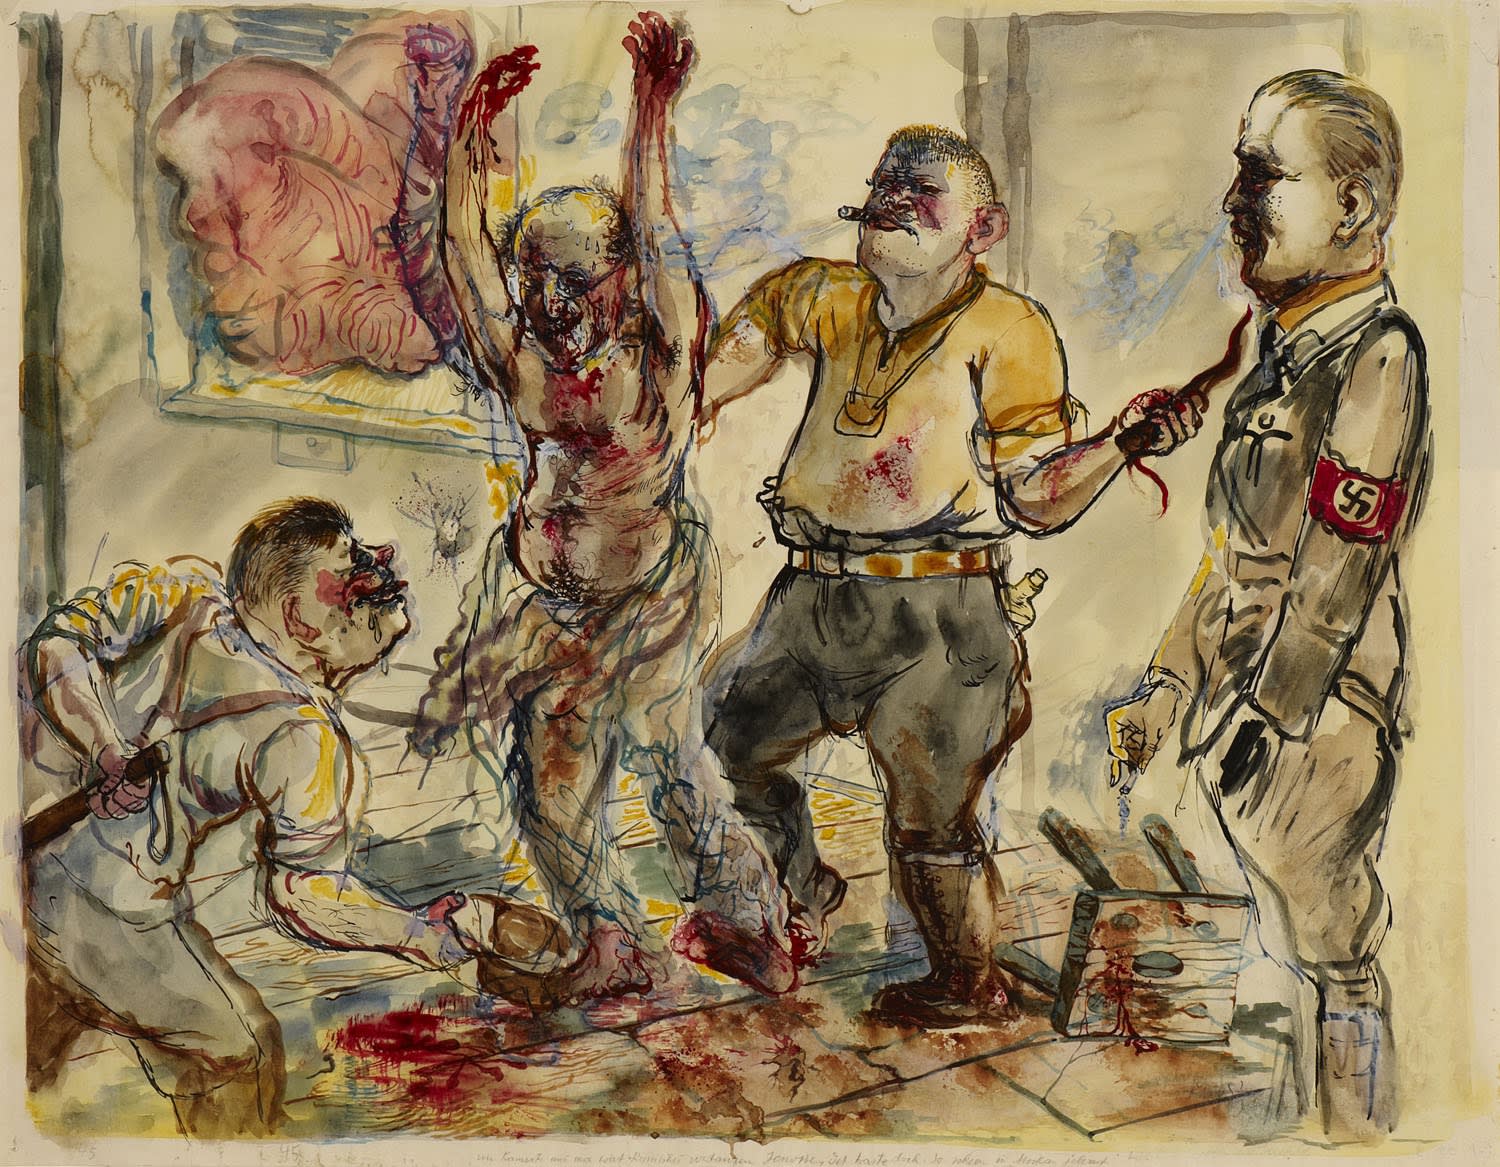 George Grosz (1893-1959) Interrogation 1938 Watercolour and ink on paper 46 x 59 cm Ben Uri Collection © George Grosz estate Acquired in 2010 with the assistance of Art Fund, the MLA/V&A Purchase Grant Fund, Sir Michael and Lady Morven Heller, Judit and George Weisz, Agnes and Edward Lee, and The Montgomery Gallery, San Francisco